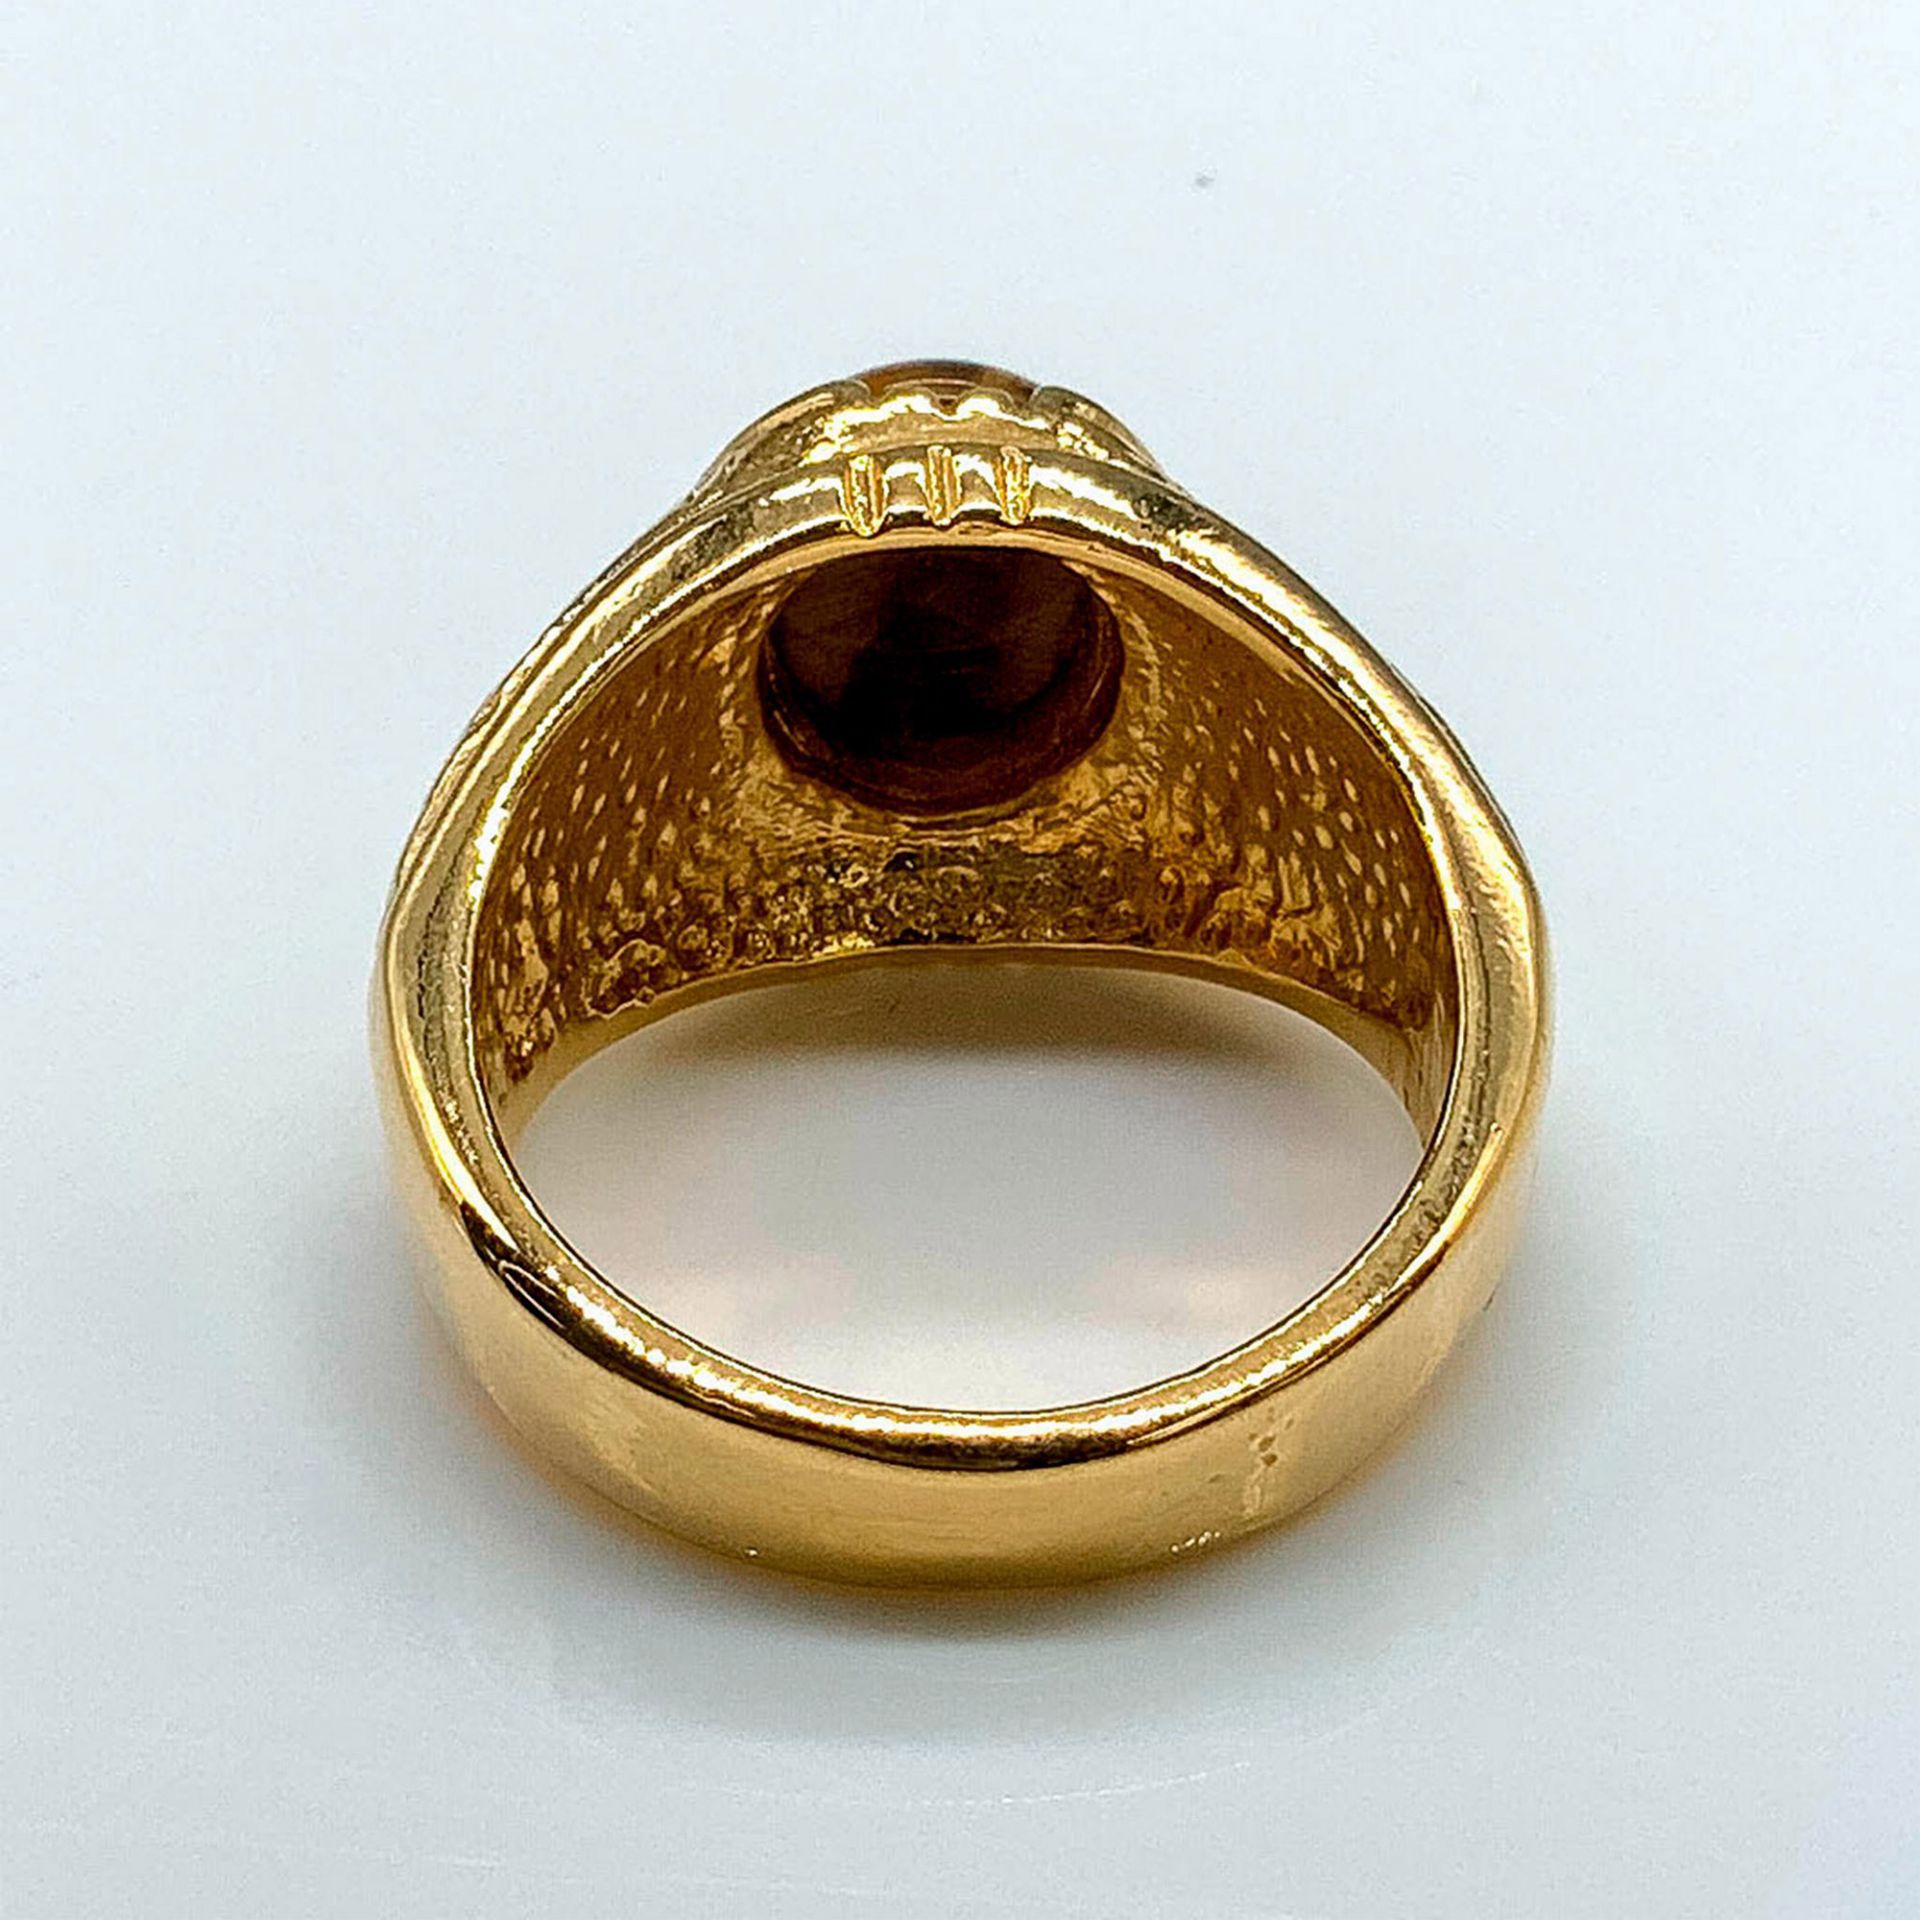 Classic Gold Tone Tiger's Eye and Cubic Zirconia Men's Ring - Image 2 of 2